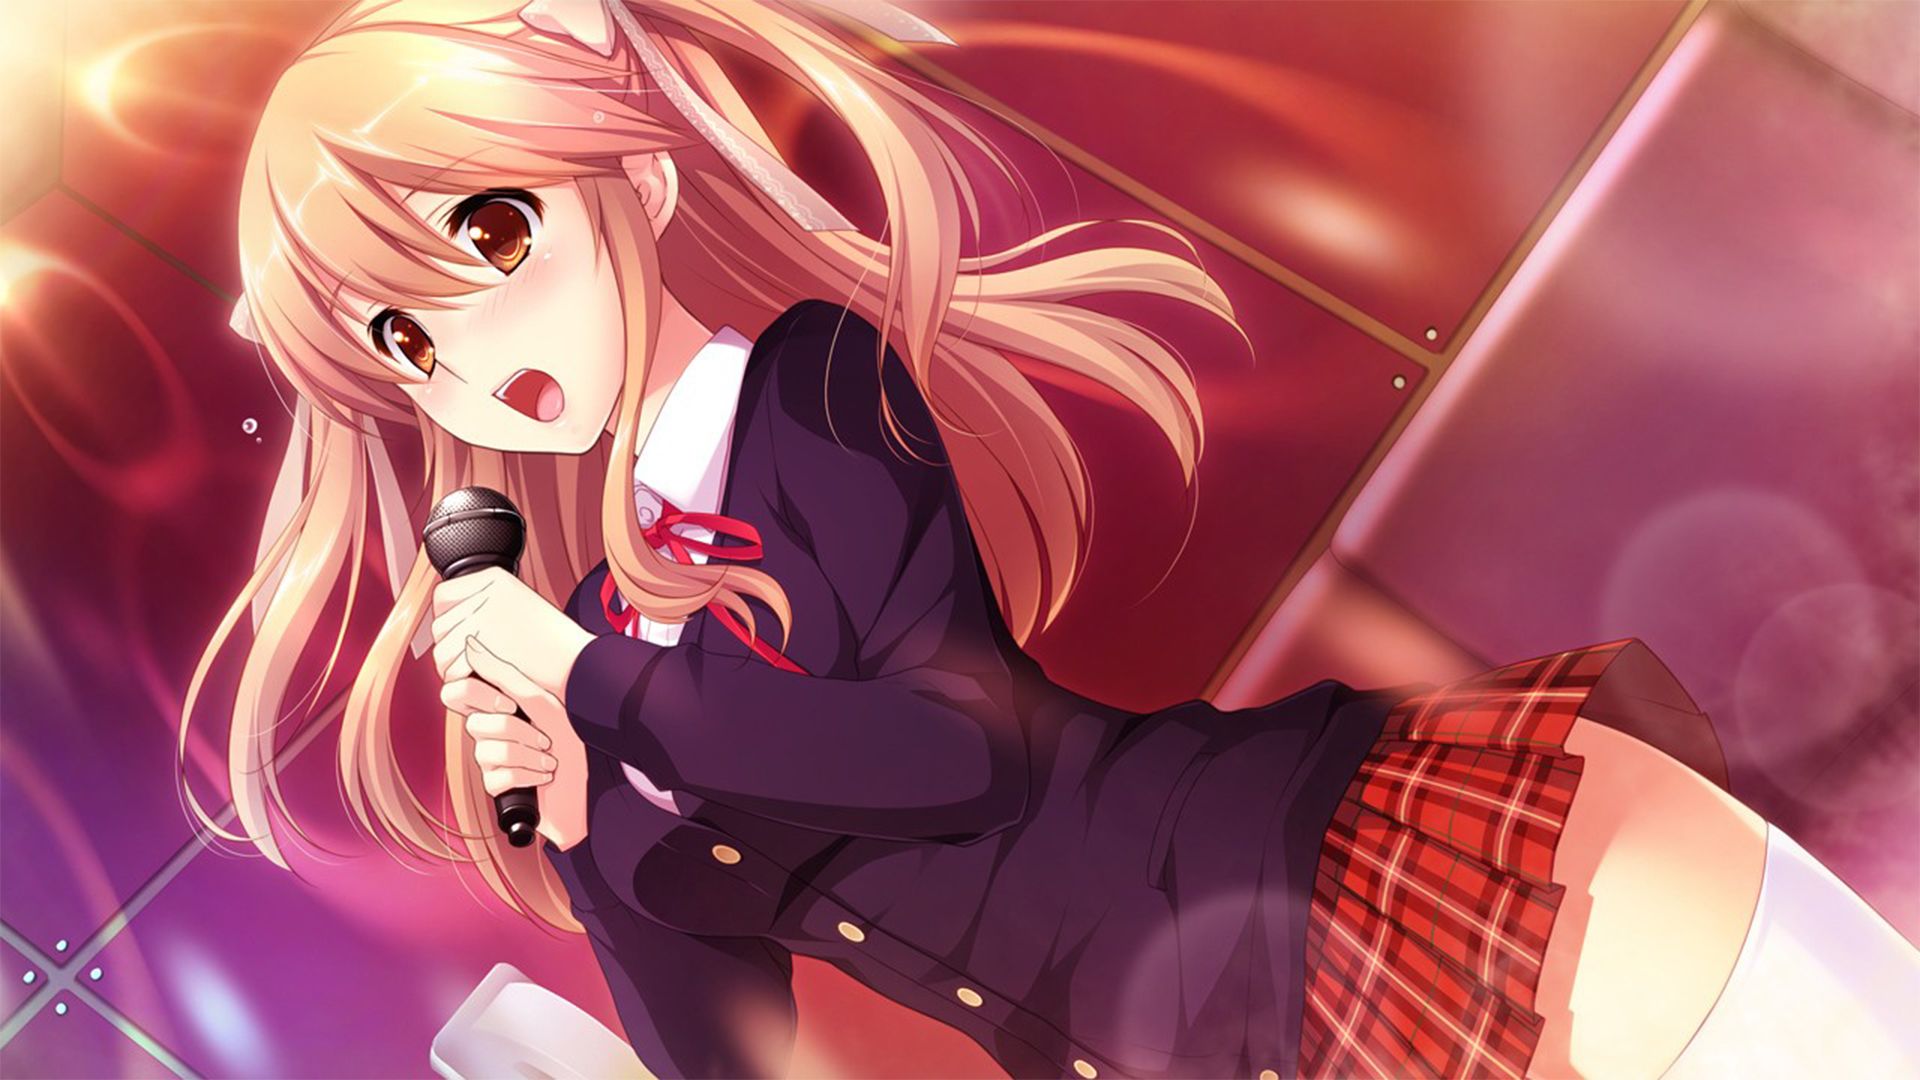 Singer Anime HD Wallpapers - Wallpaper Cave